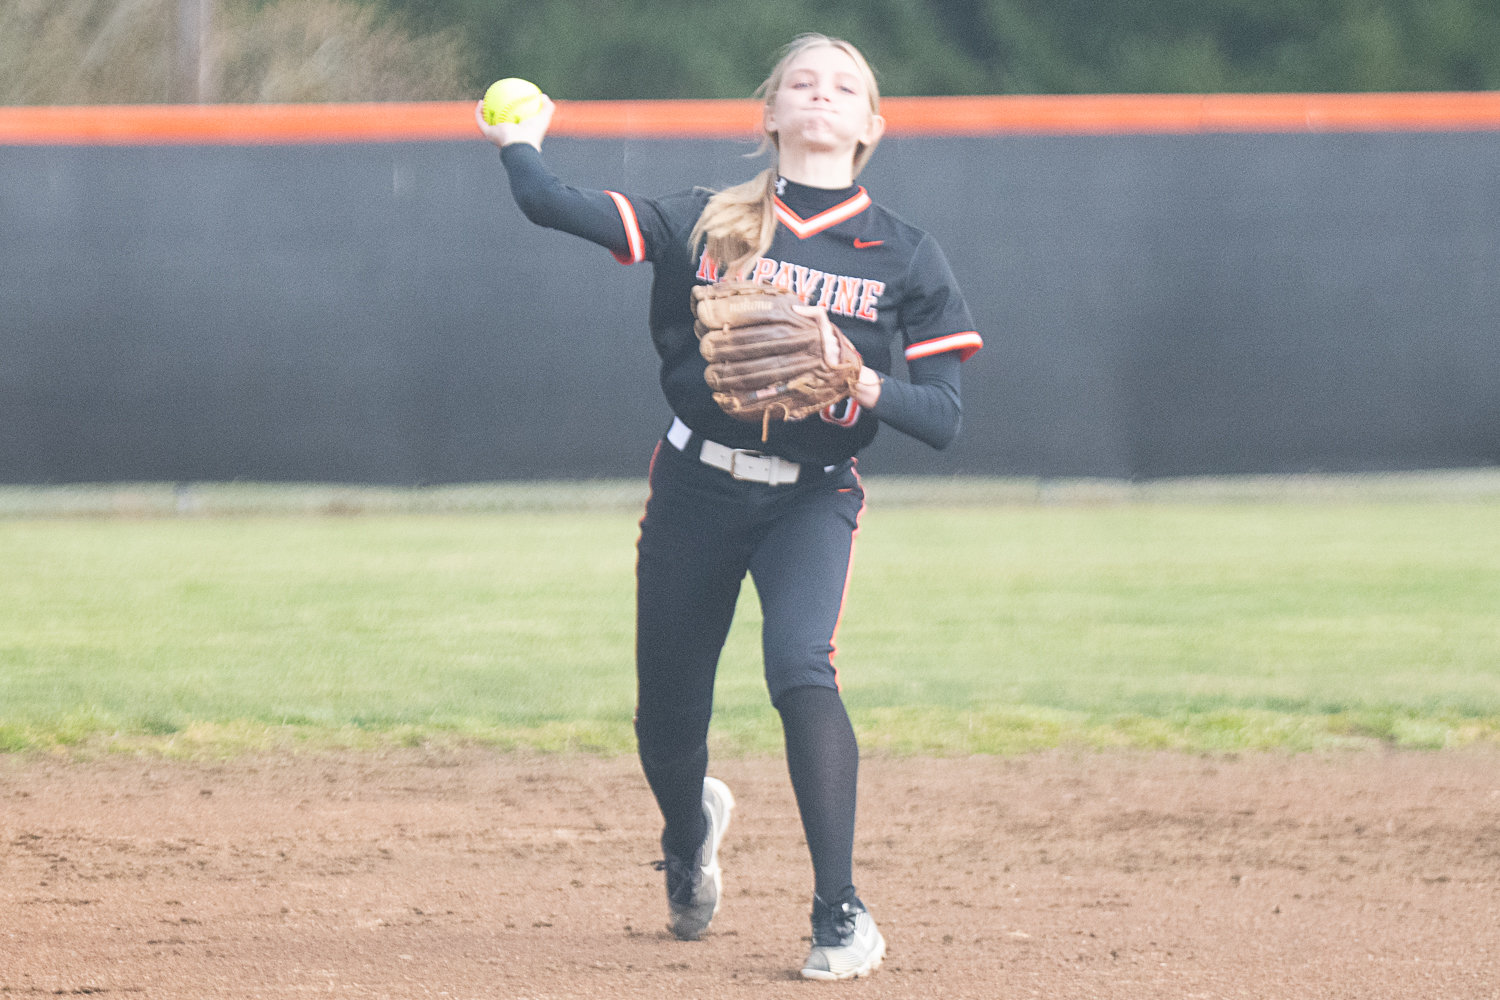 Taylen Evander relays a ball to the plate during Napavine's game against Elma on March 20.